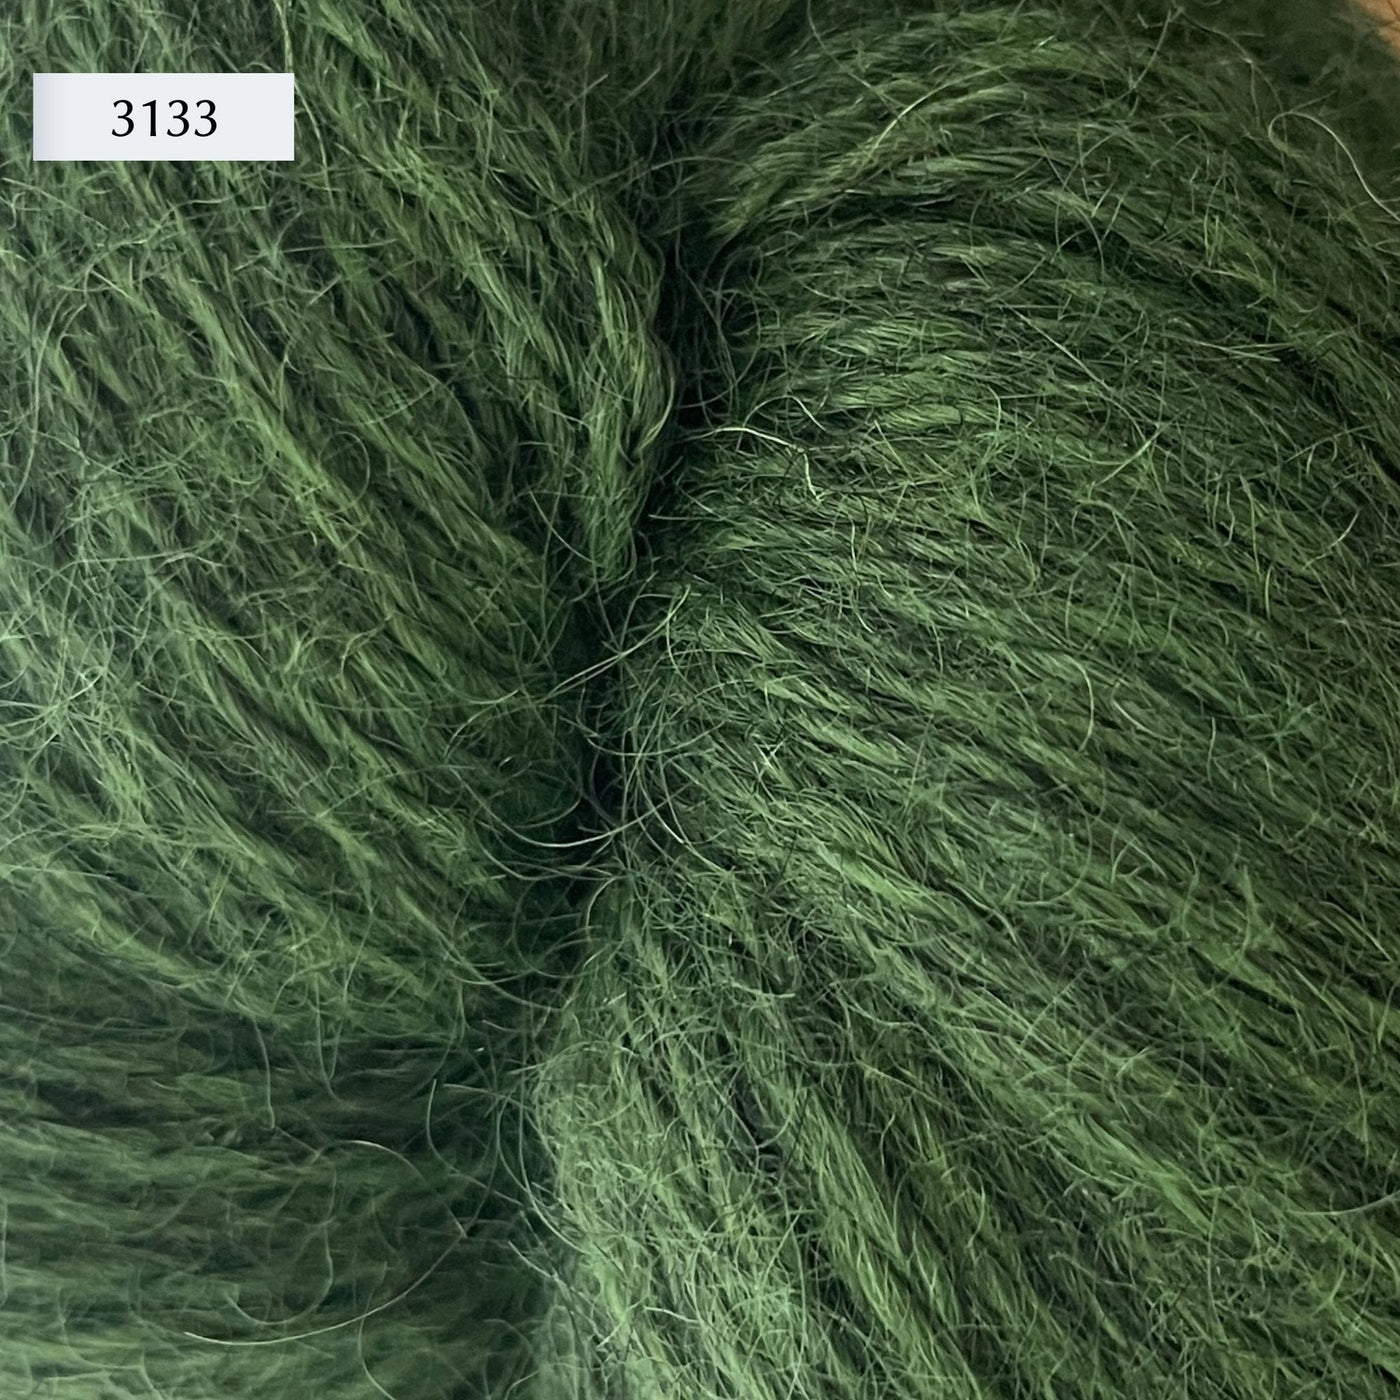 Ullcentrum 3ply, a worsted weight wool yarn, in color 3133, a mid-tone grass green